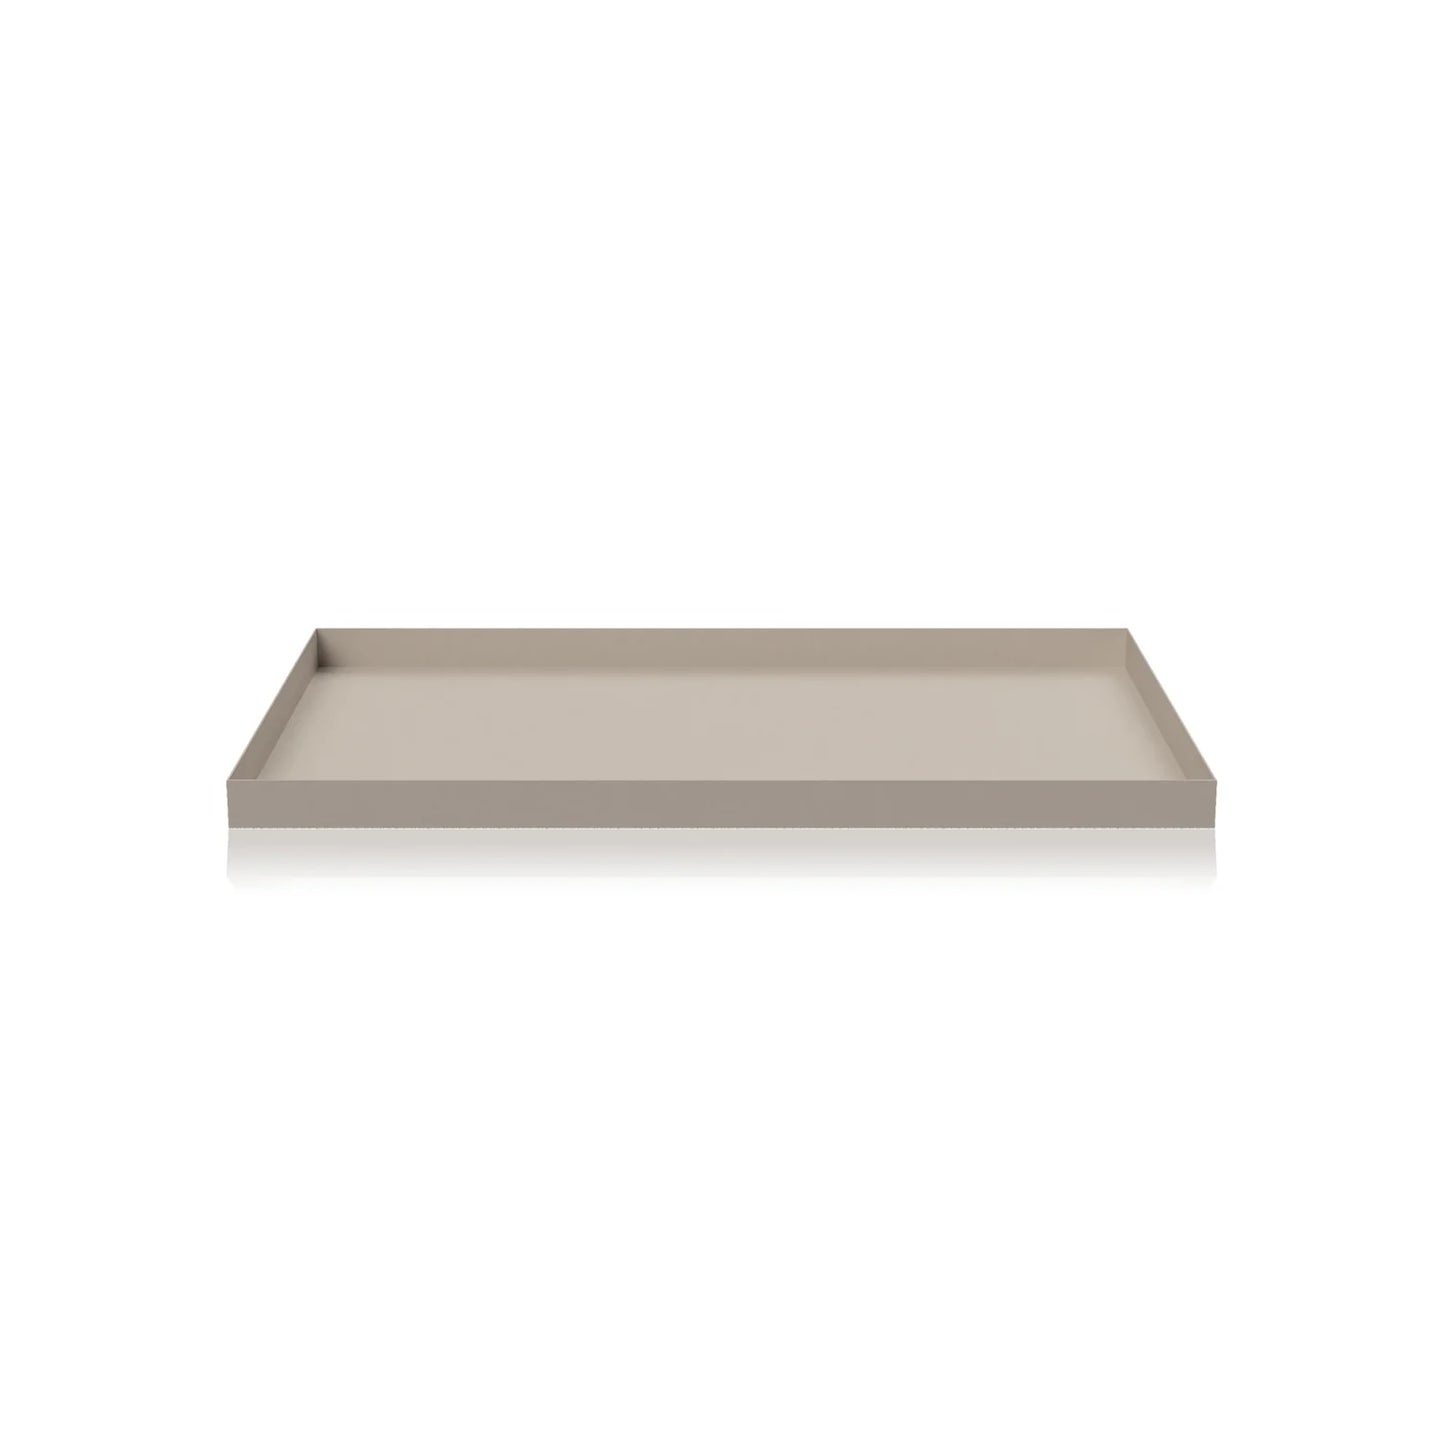 COOEE l TRAY SQUARE - 39cm - SAND